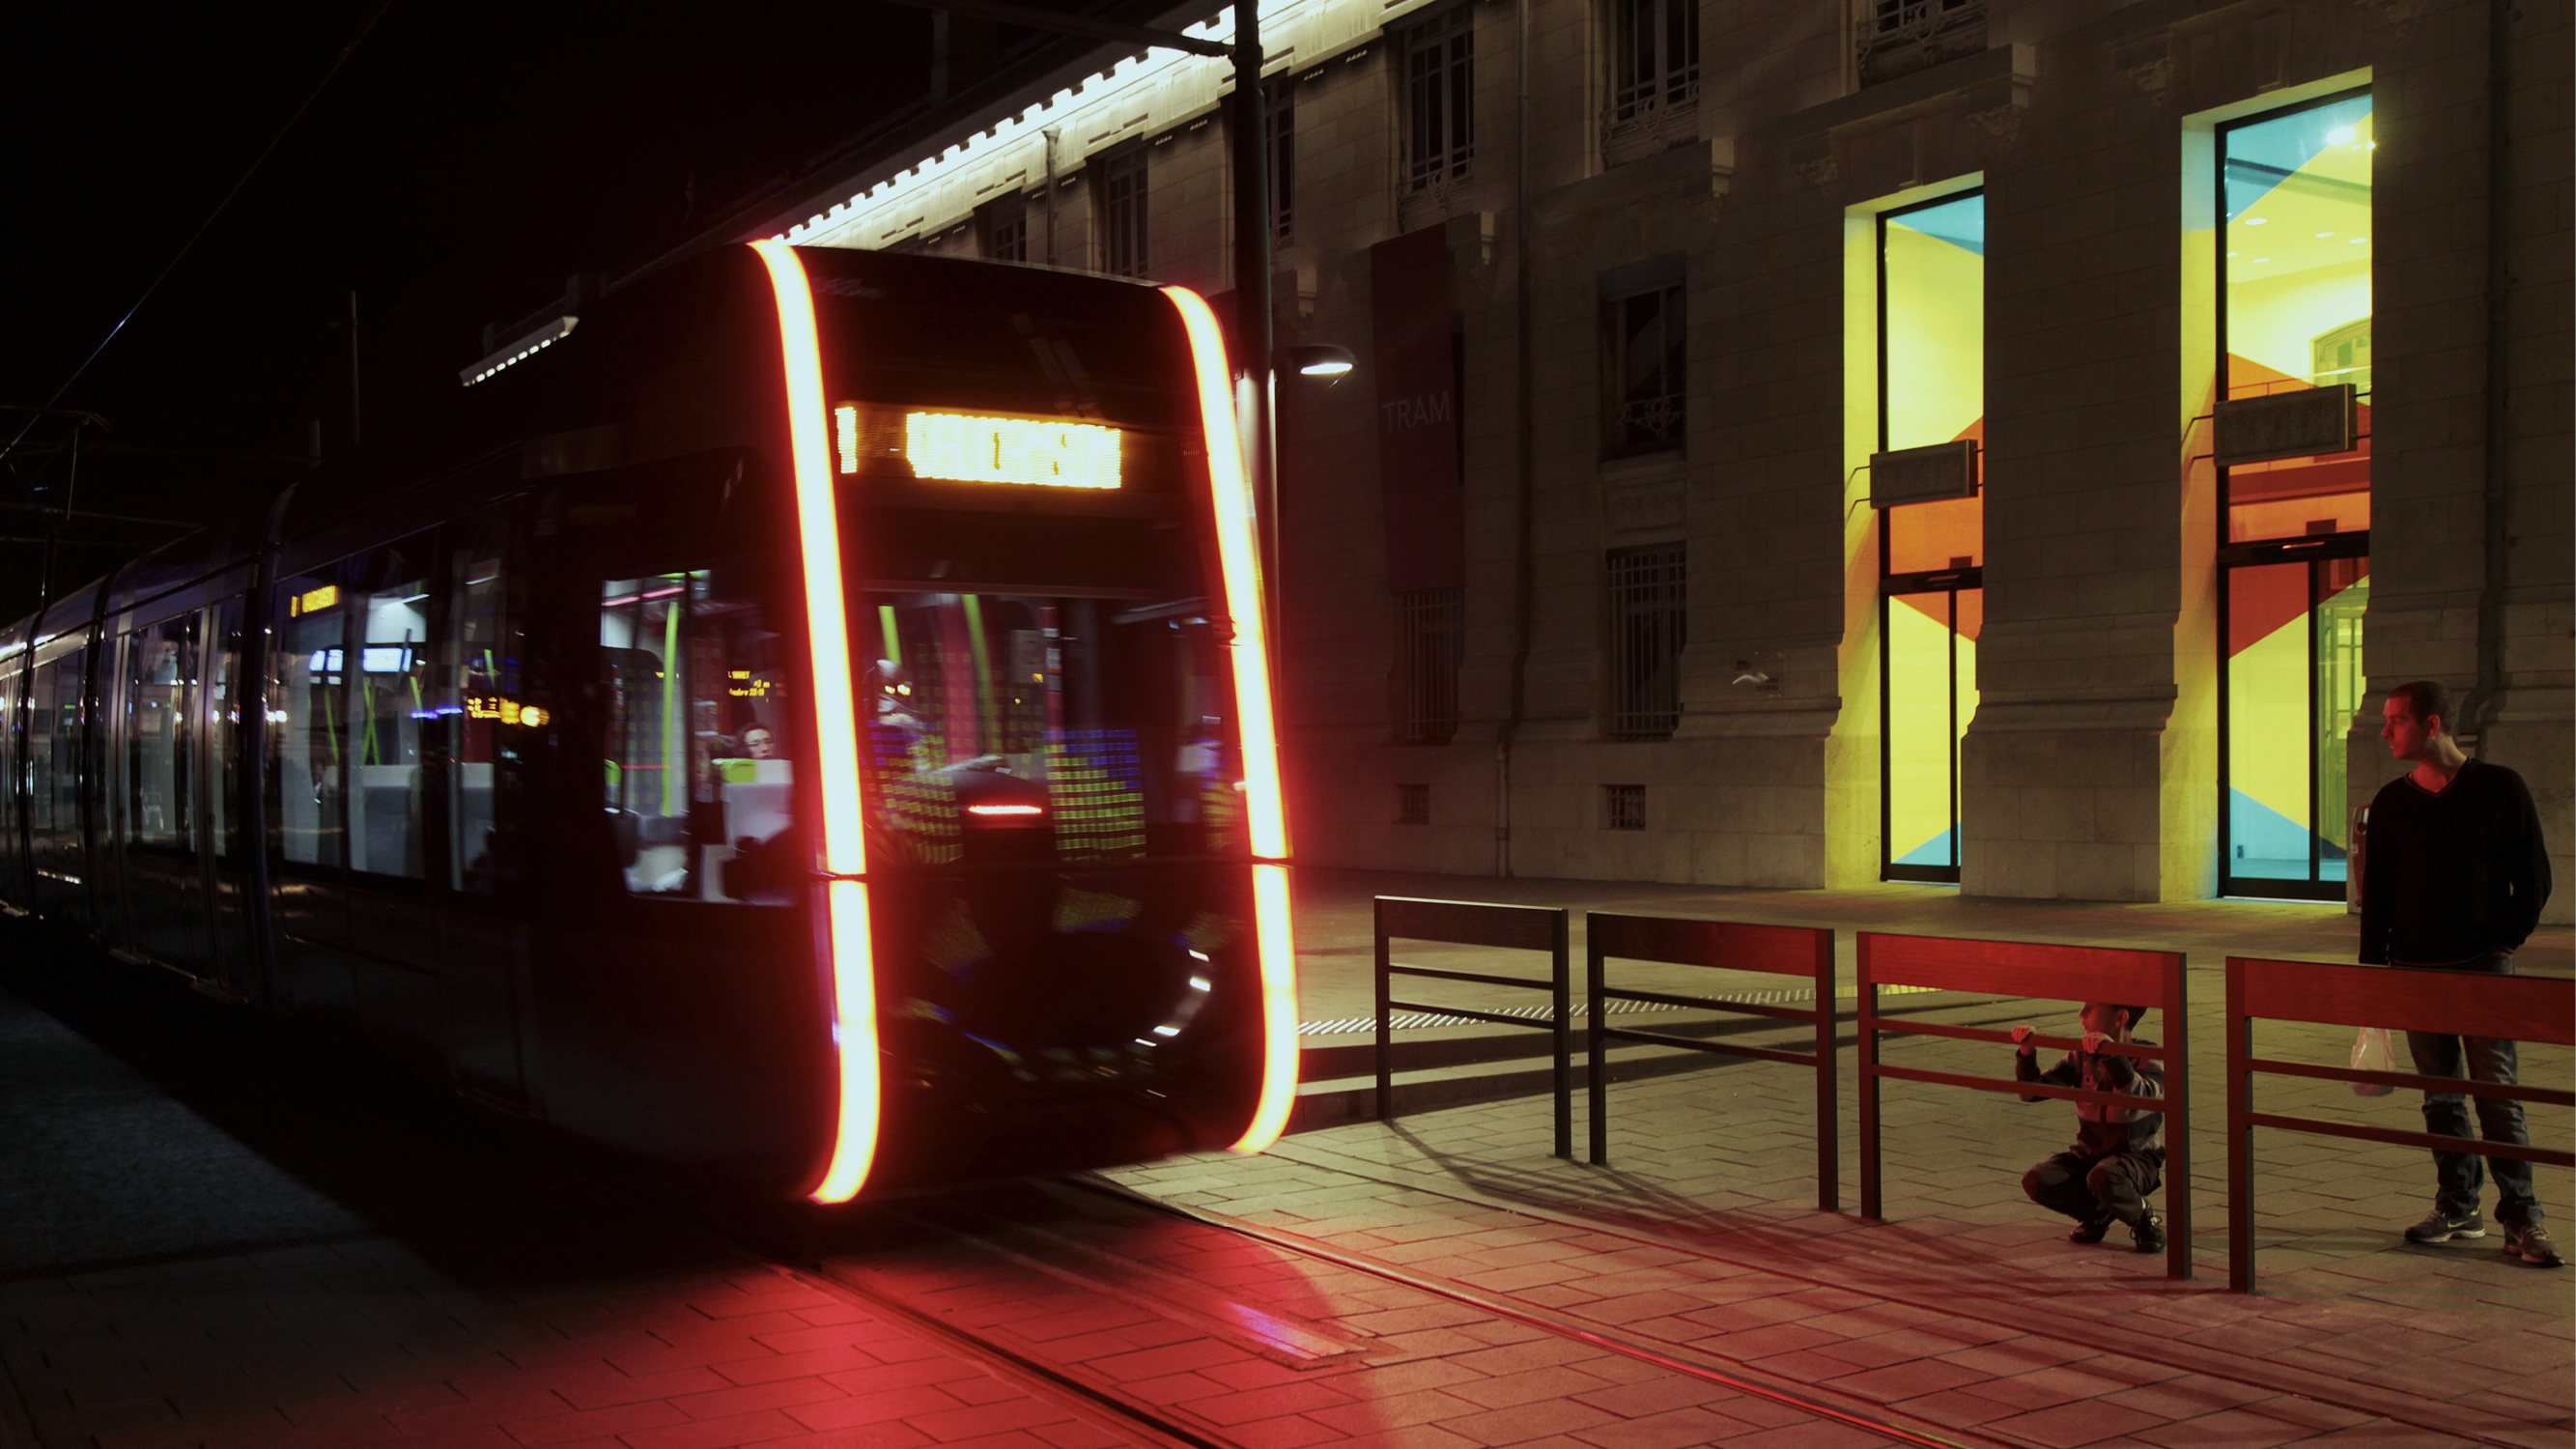 the tram at night